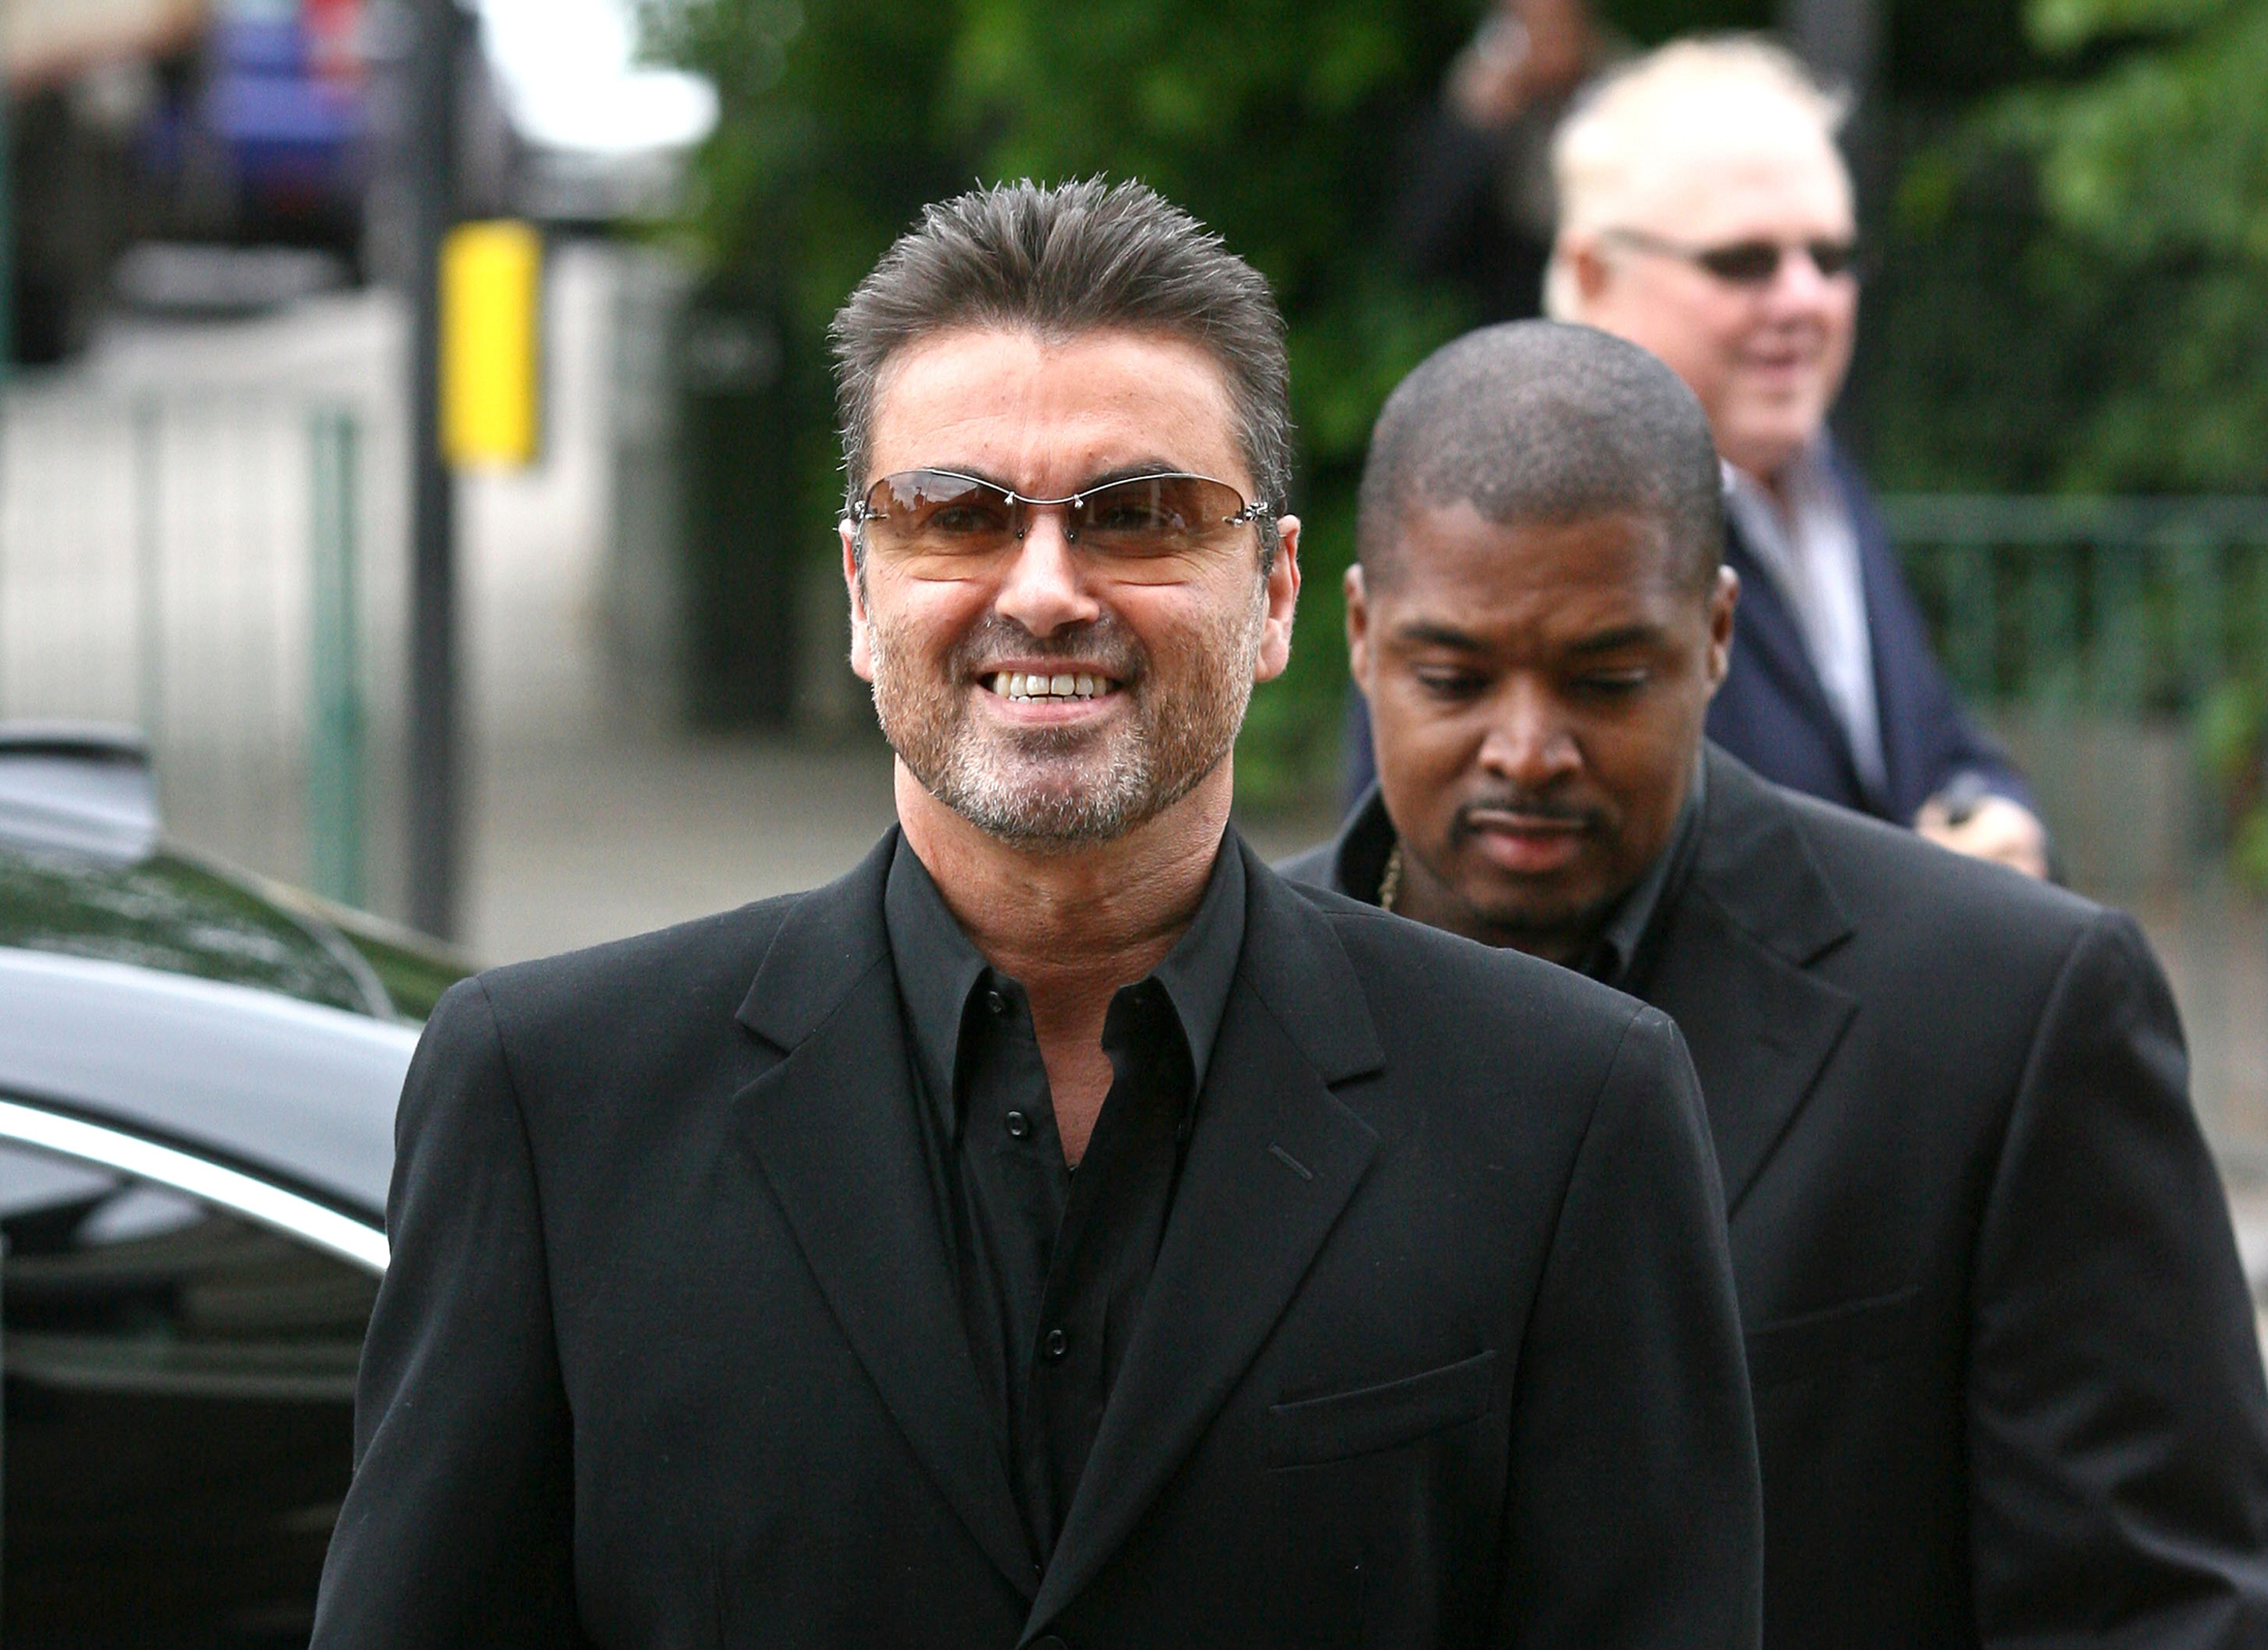 (FILES) This file photo taken on May 8, 2007 shows British pop star George Michael (L) arriving at Brent Magistrates Court in west London, as he faces charges of driving while unfit through drugs. British pop singer George Michael, who rose to fame with the band Wham! and sold more than 100 million albums in his career, has died aged 53, his publicist said on December 25, 2016. / AFP PHOTO / CHRIS YOUNG